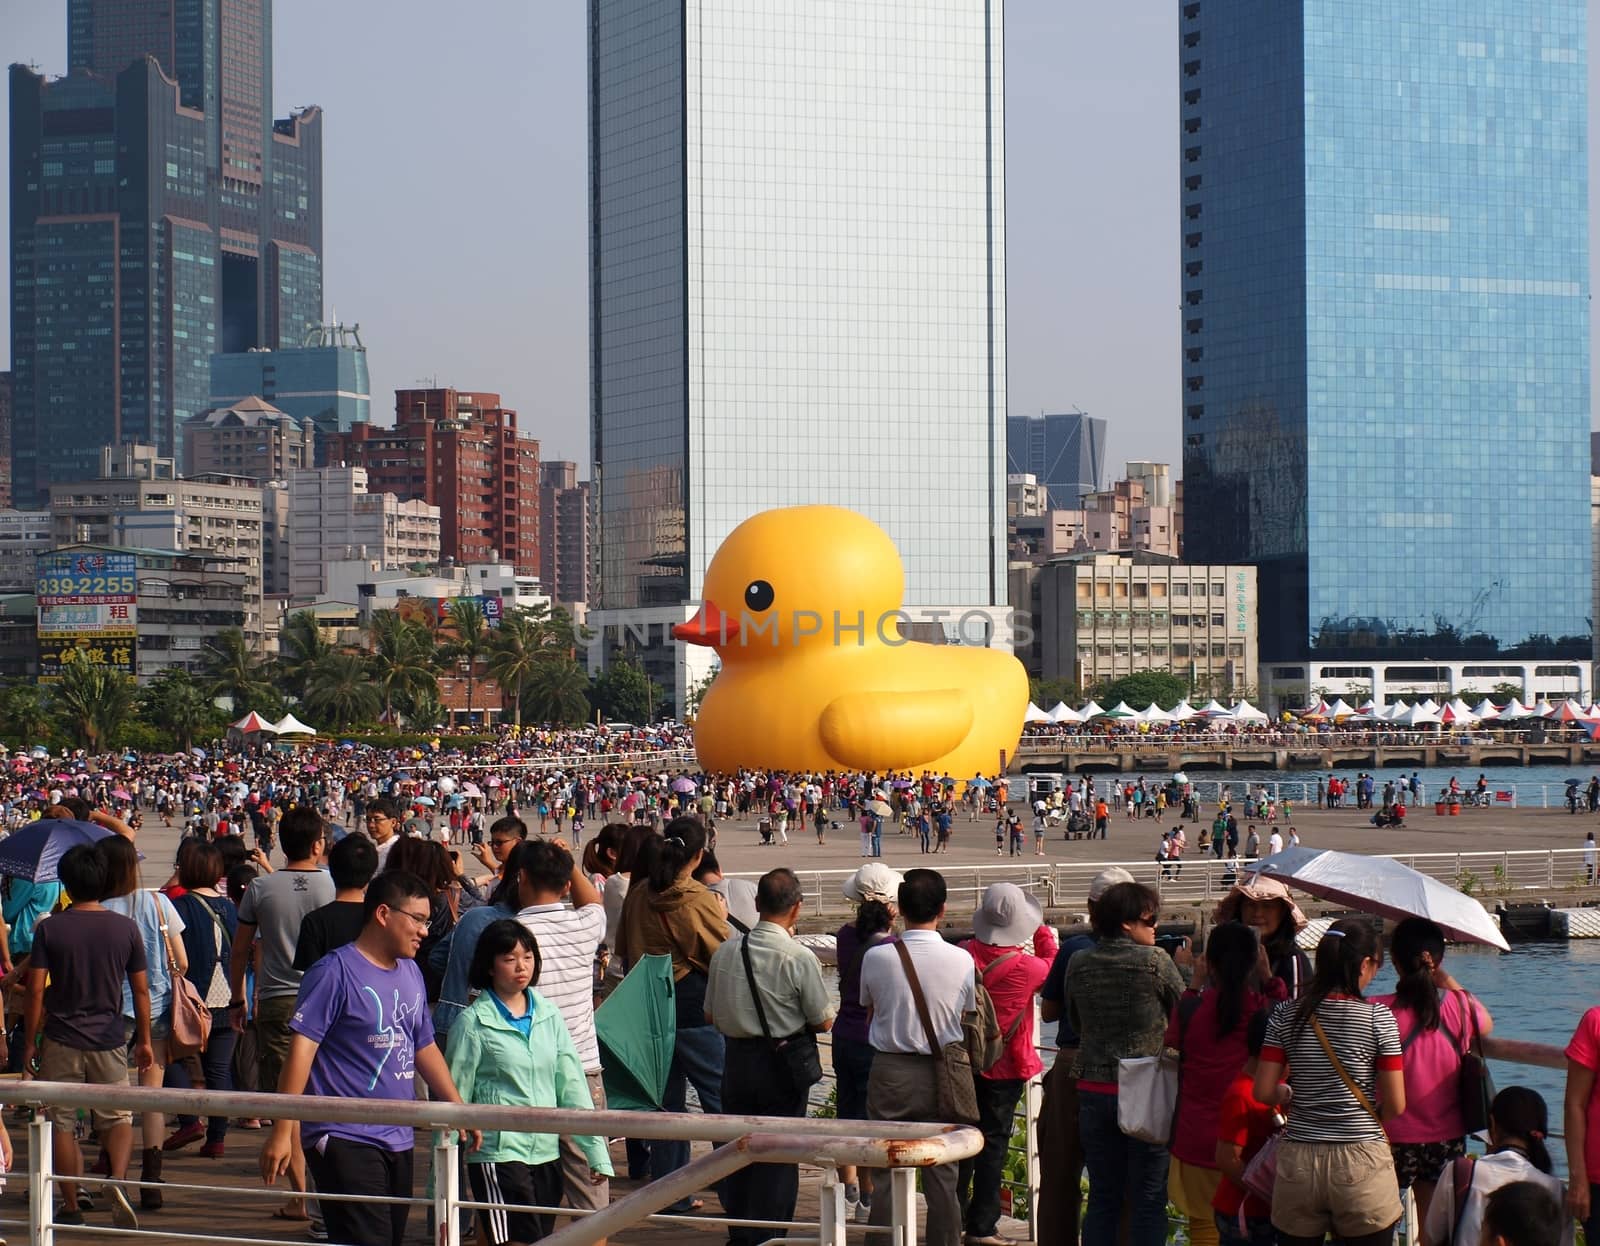 KAOHSIUNG, TAIWAN -- SEPTEMBER 28: Visitors flock to see the giant rubber duck designed by Dutch artist Hofman while it is on display at the Glory Pier on September 28, 2013 in Kaohsiung